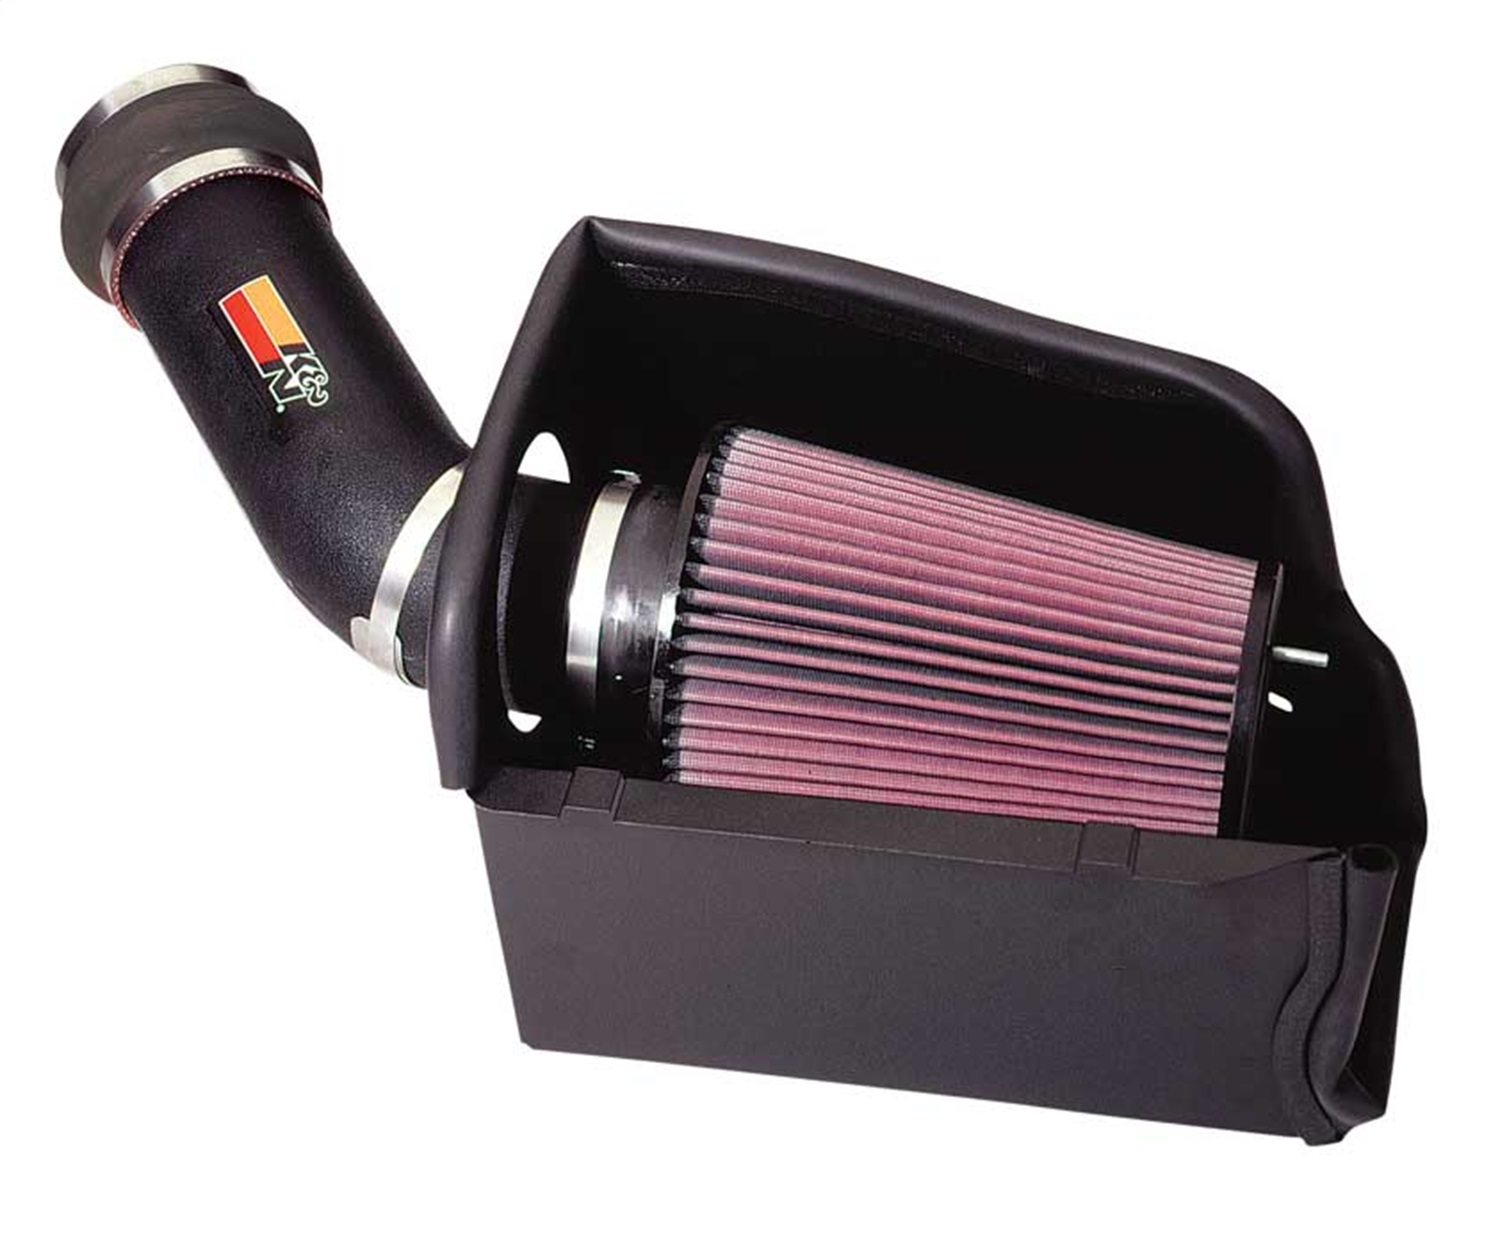 K&N Filters K&N Filters 57-2531 Filtercharger Injection Performance Kit Fits F-250 F-350